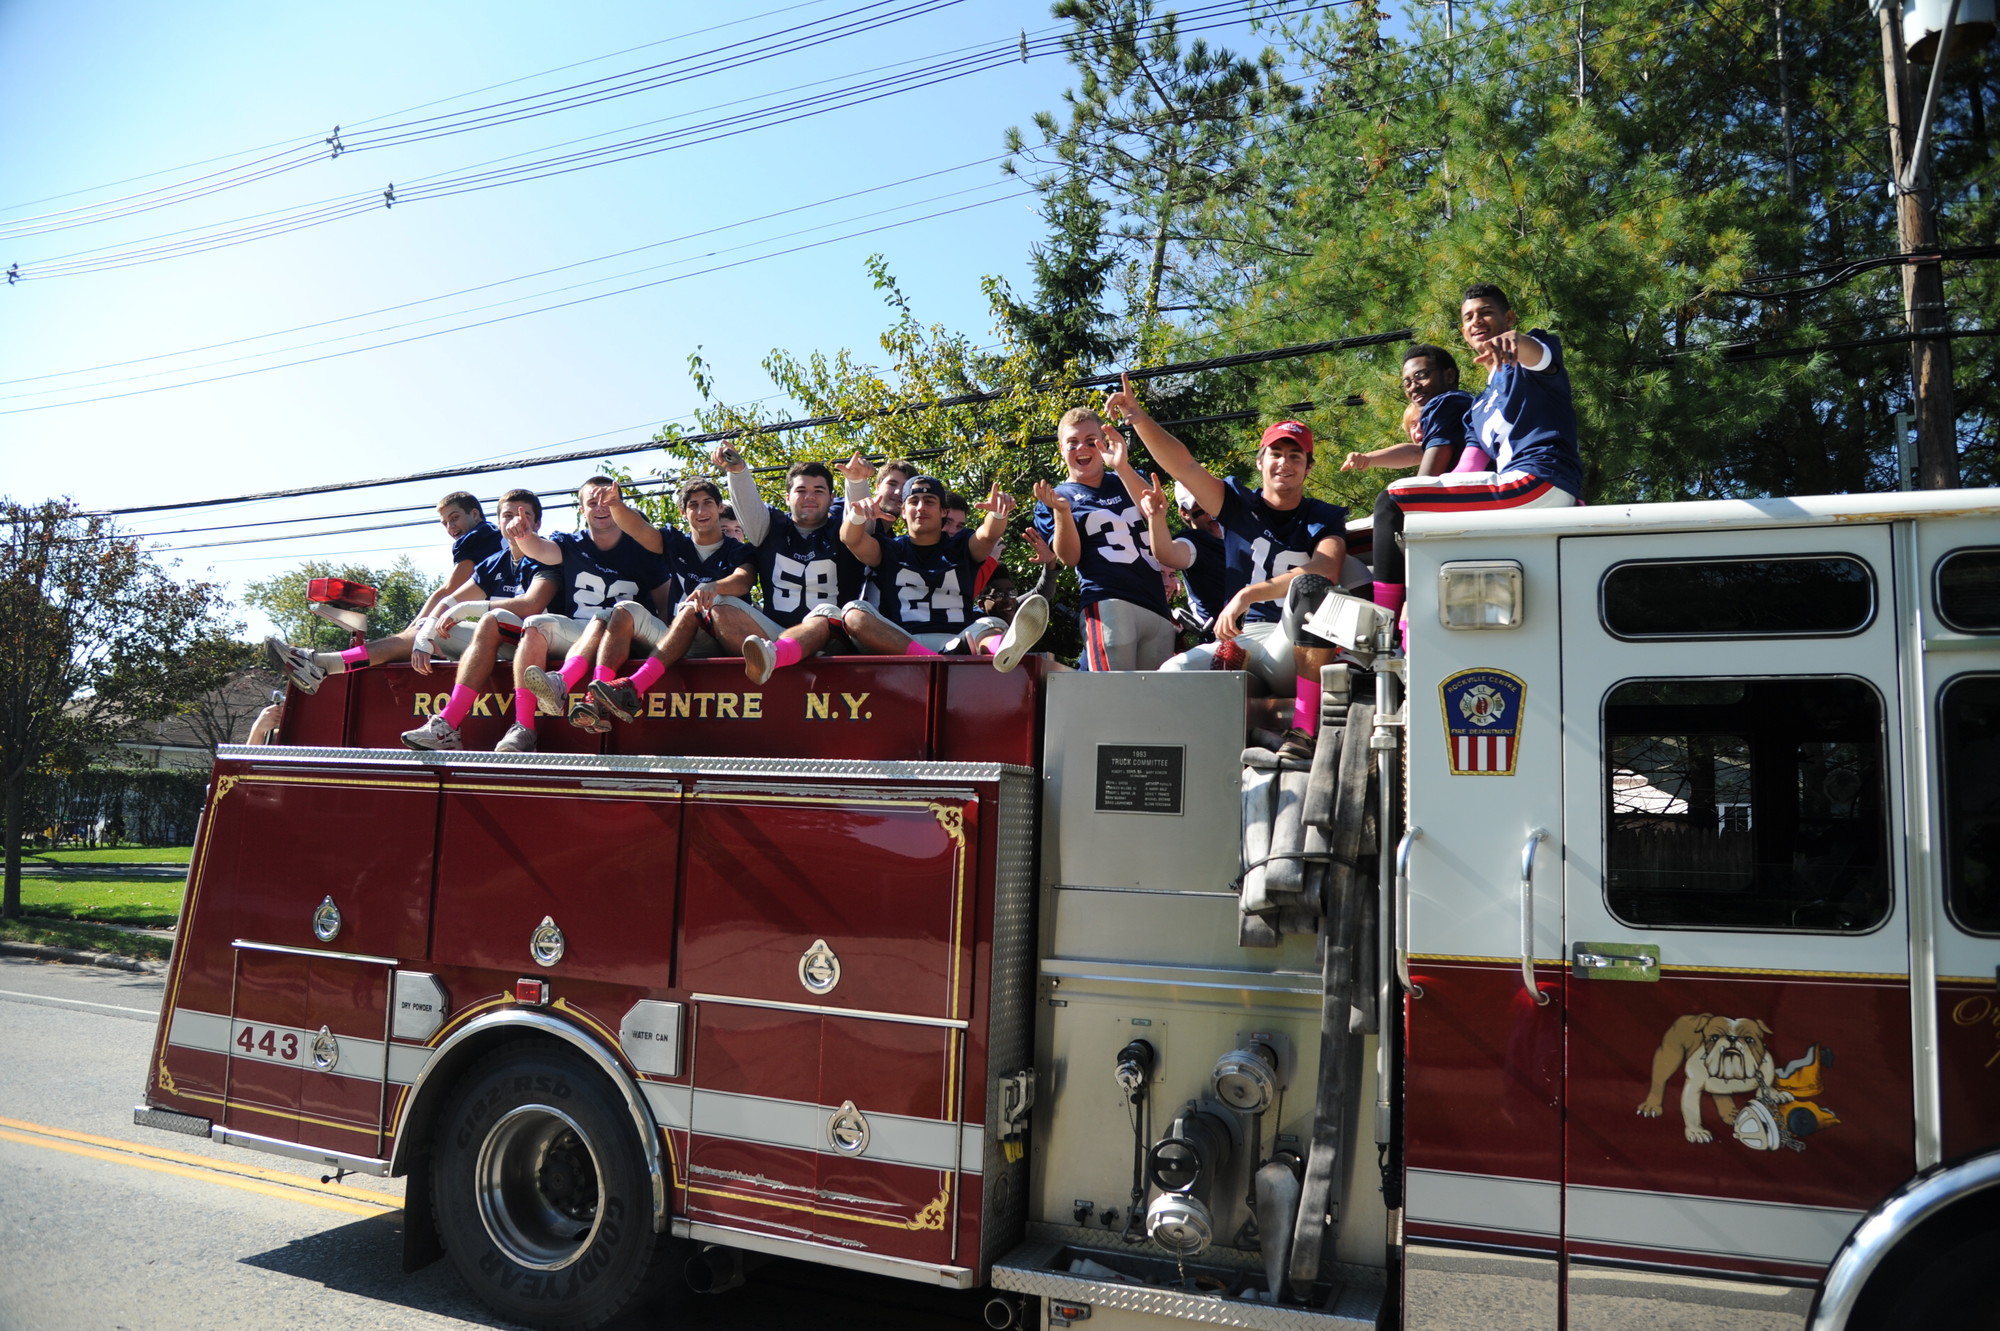 Before they rode to victory, the football team rode to the game atop a Rockville Centre Fire Department truck.